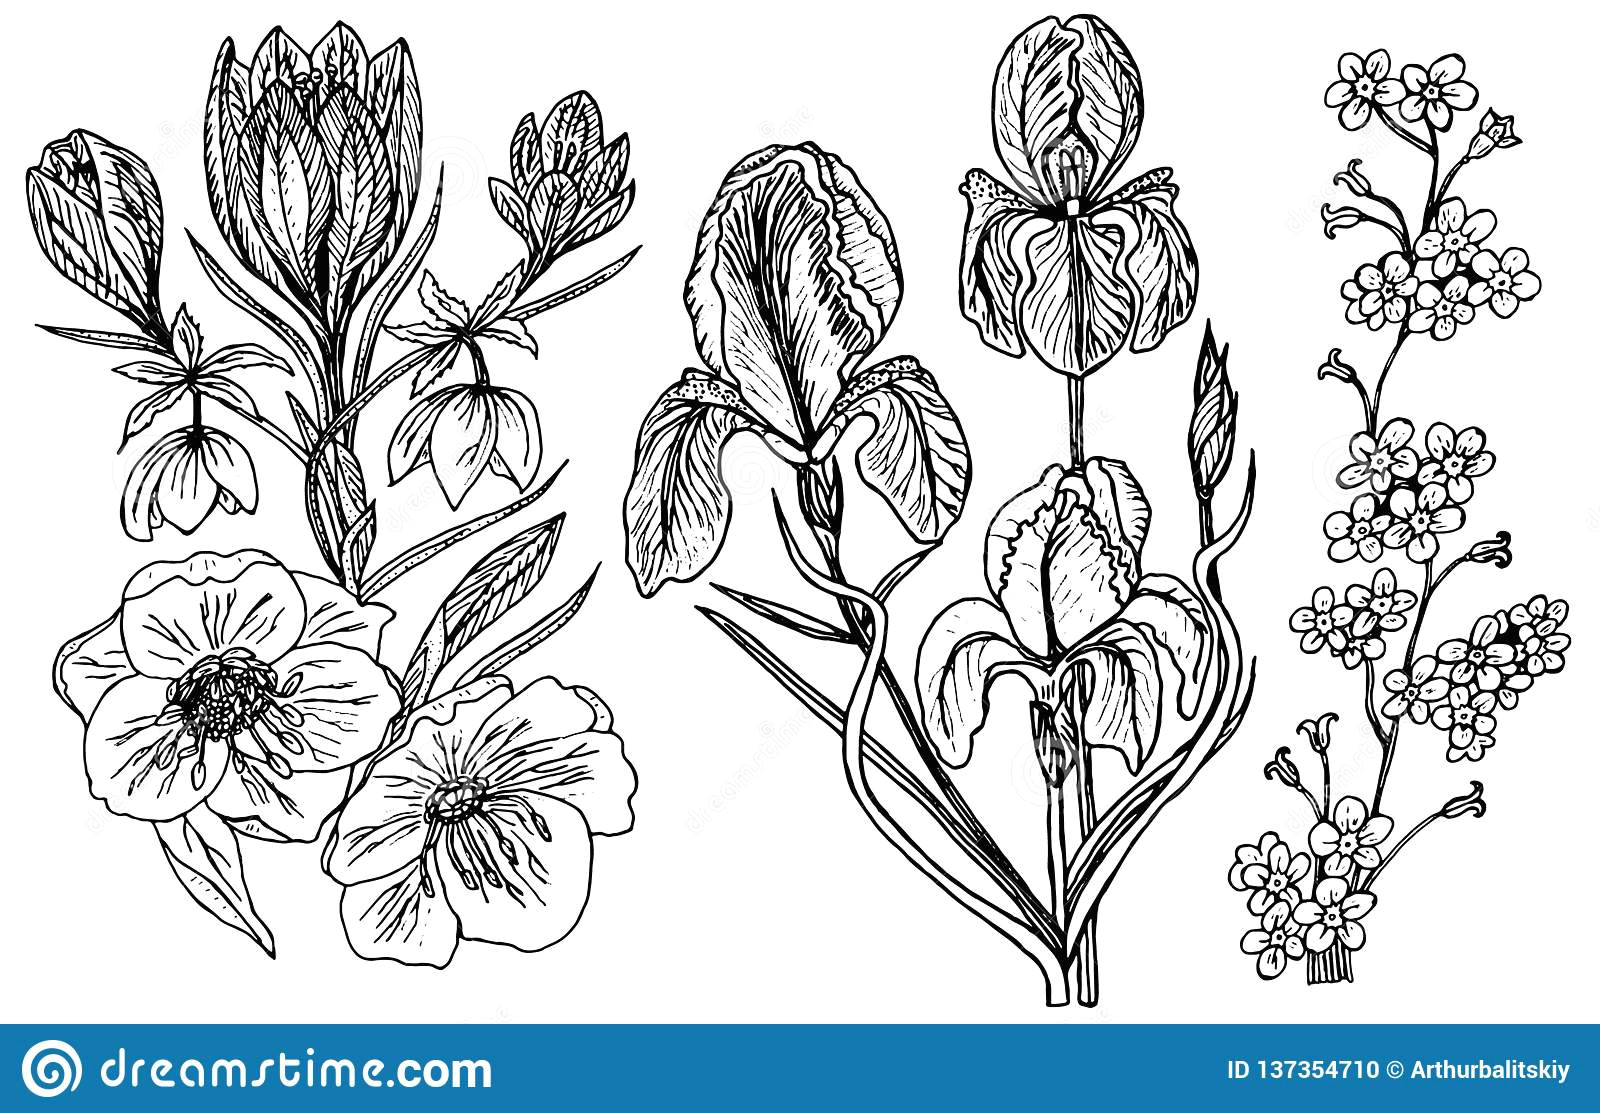 Drawing Of Flowers with Leaves Wild Flowers with Leaves Set Of Wedding Botanical Plant with Leaf